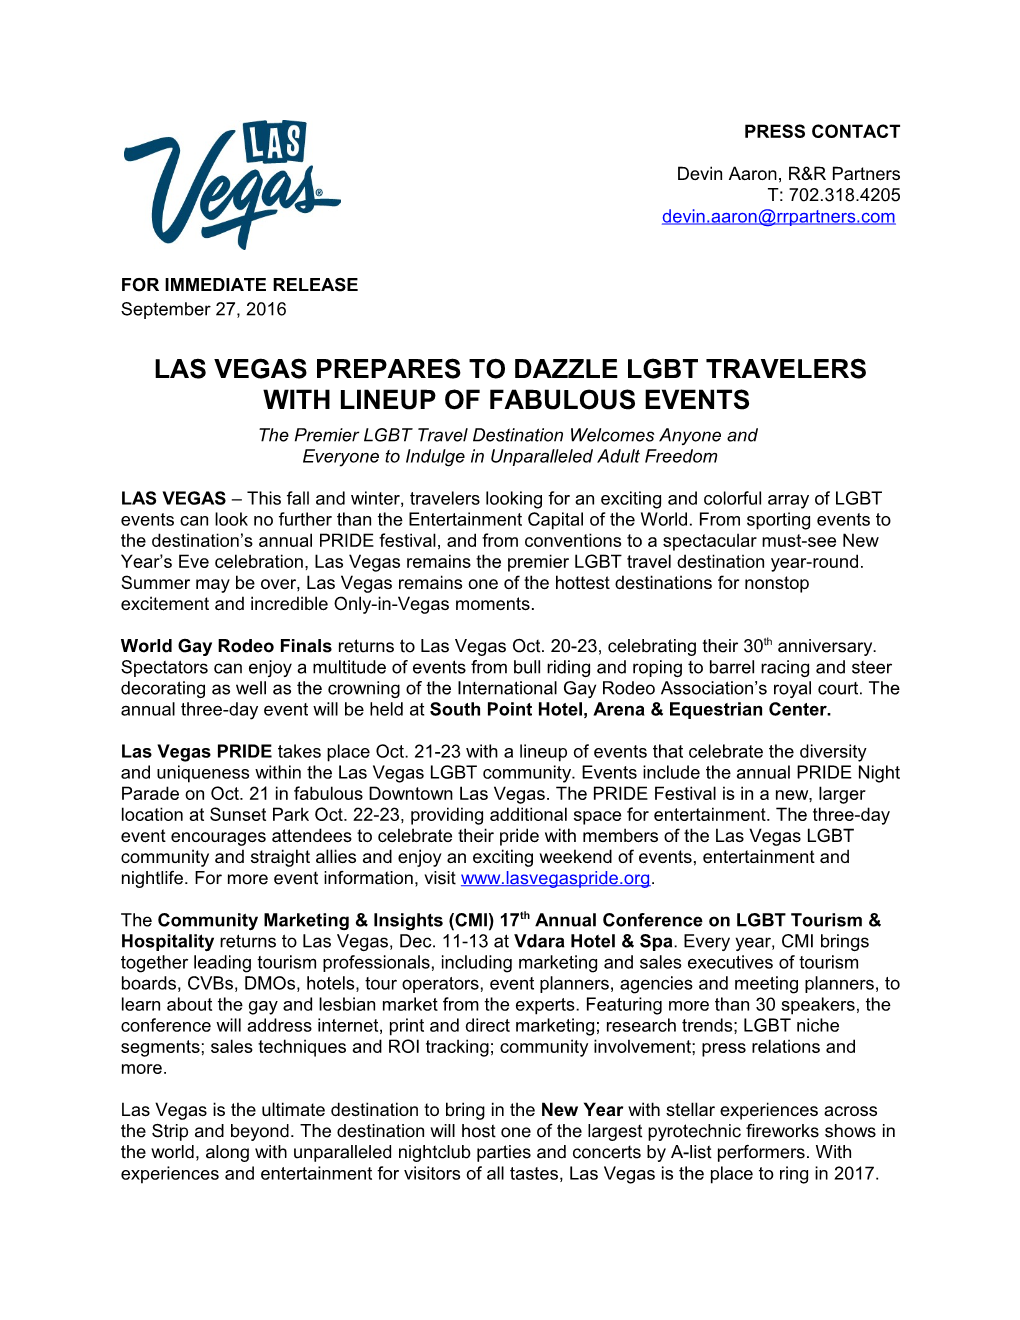 Las Vegas Prepares to Dazzle Lgbt Travelers with Lineup of Fabulous Events